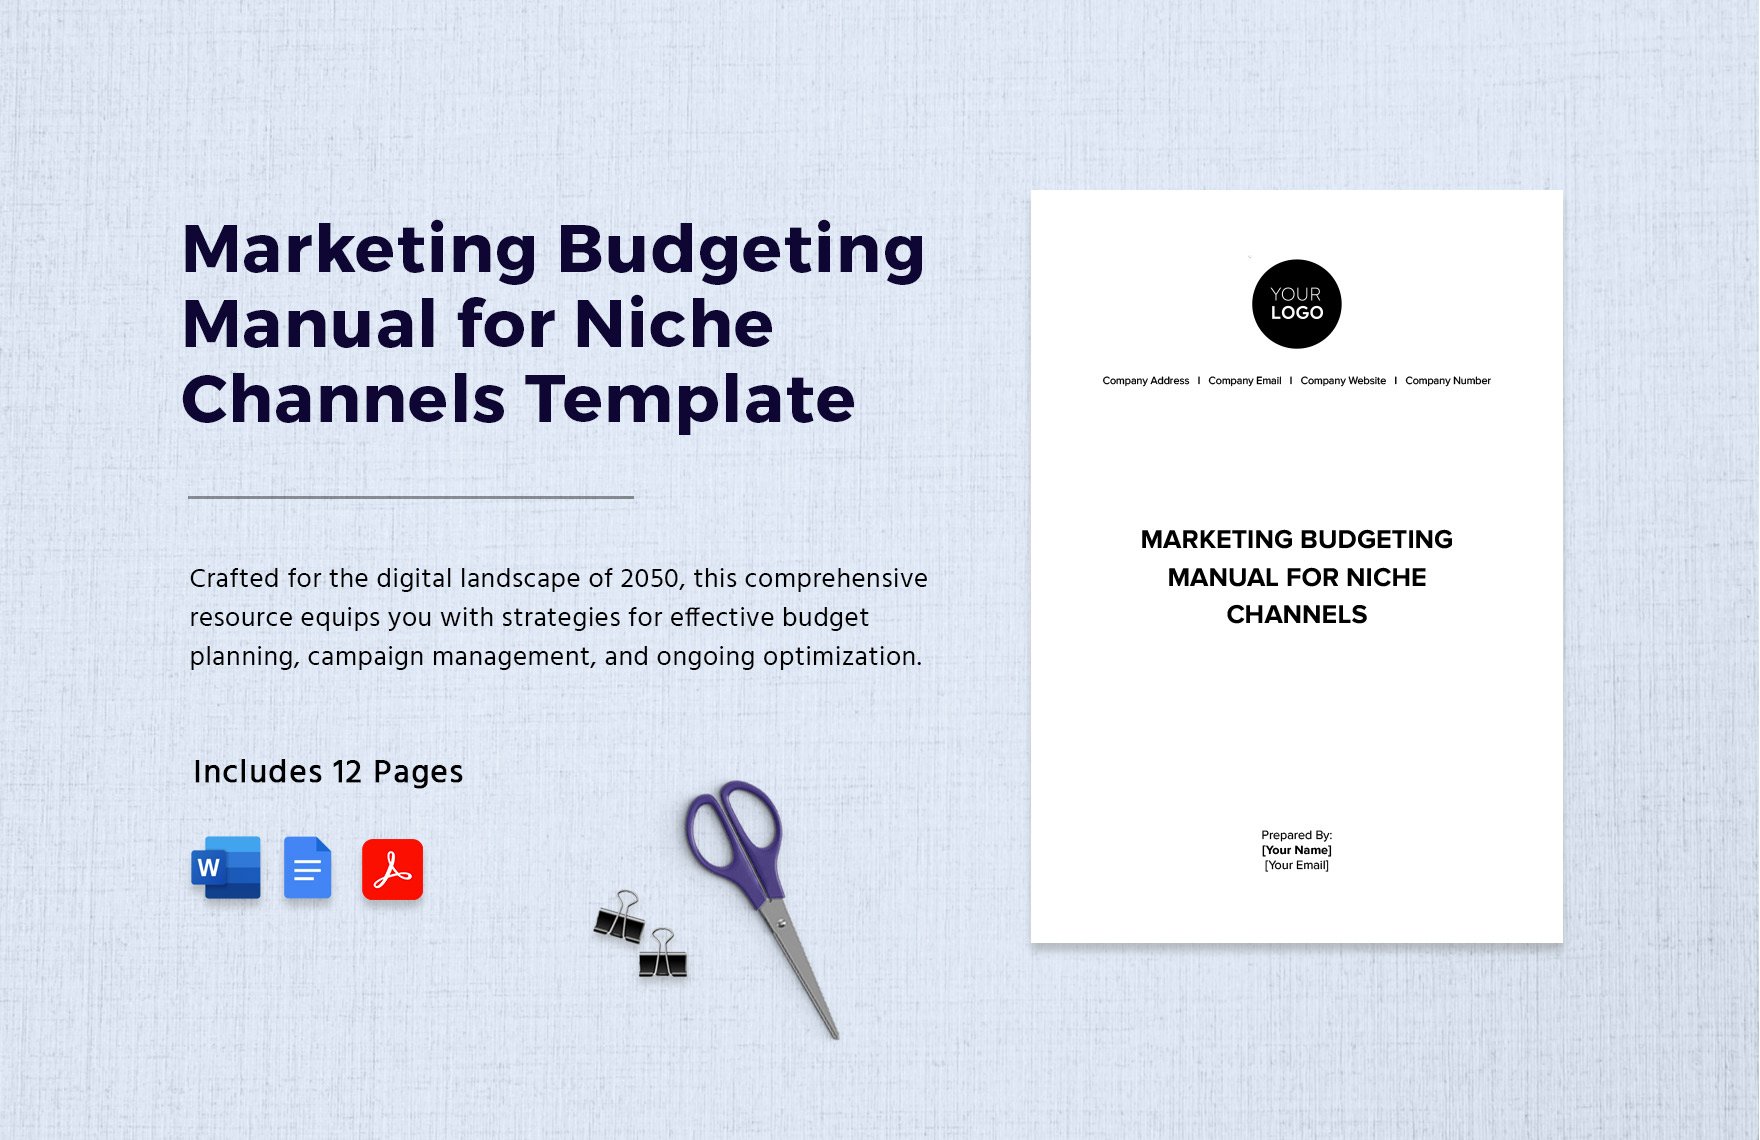 Marketing Budgeting Manual for Niche Channels Template